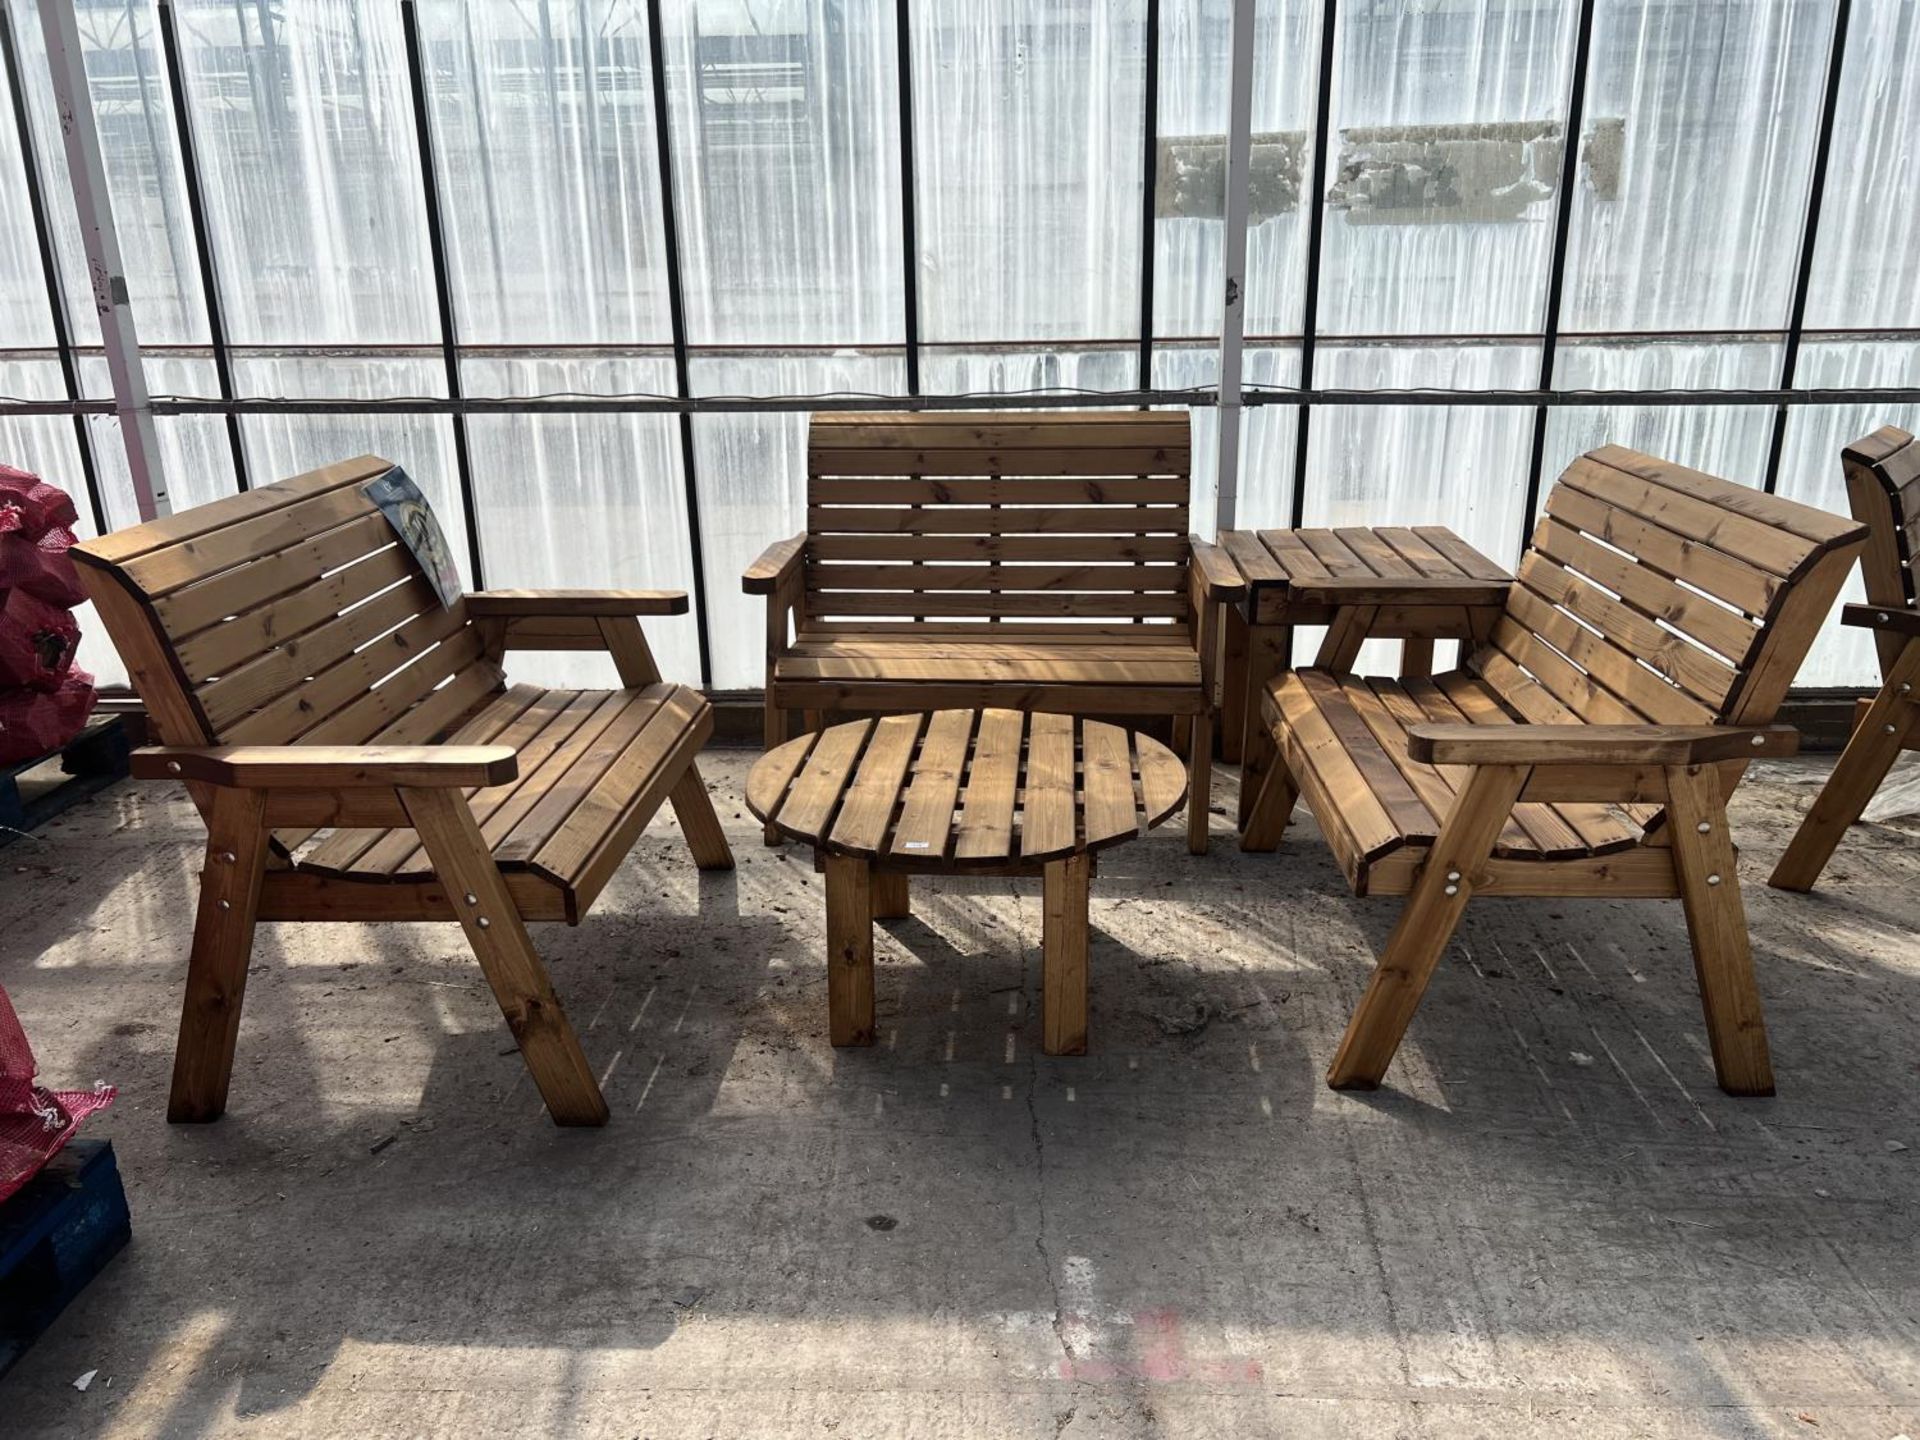 AN AS NEW EX DISPLAY CHARLES TAYLOR PATIO SET COMPRISING THREE 2 SEAT BENCHES TWO TABLES ONE ROUND &